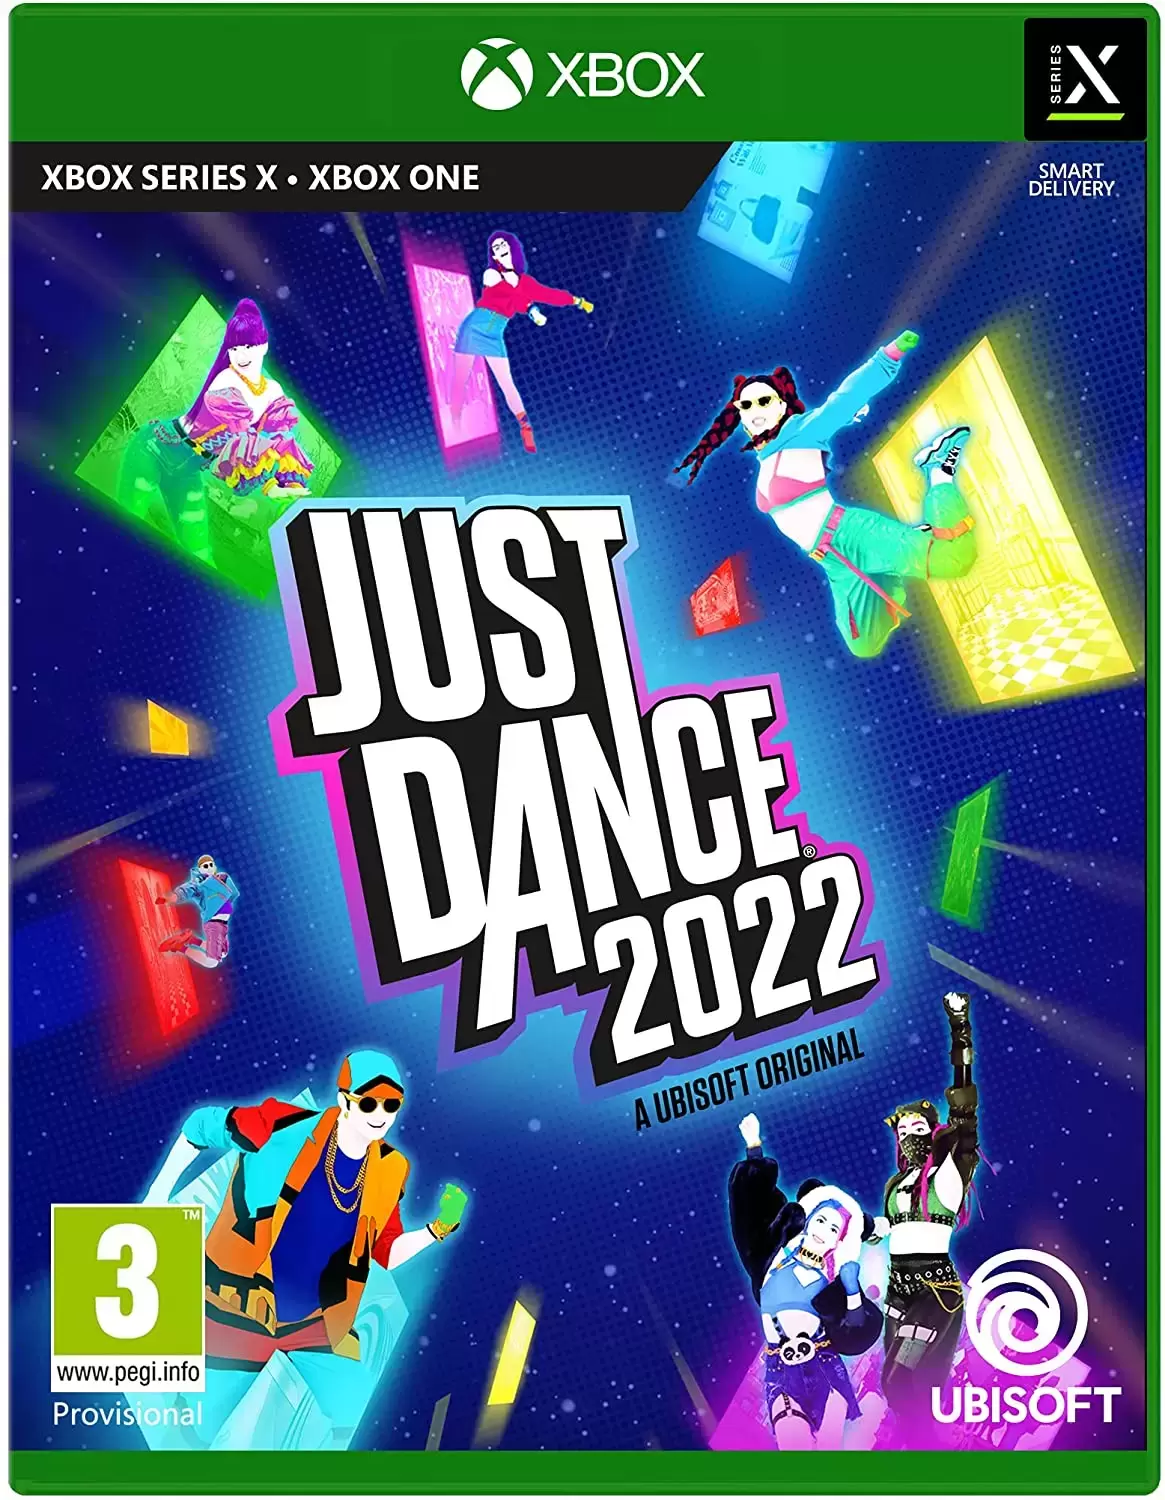 XBOX One Games - Just Dance 2022